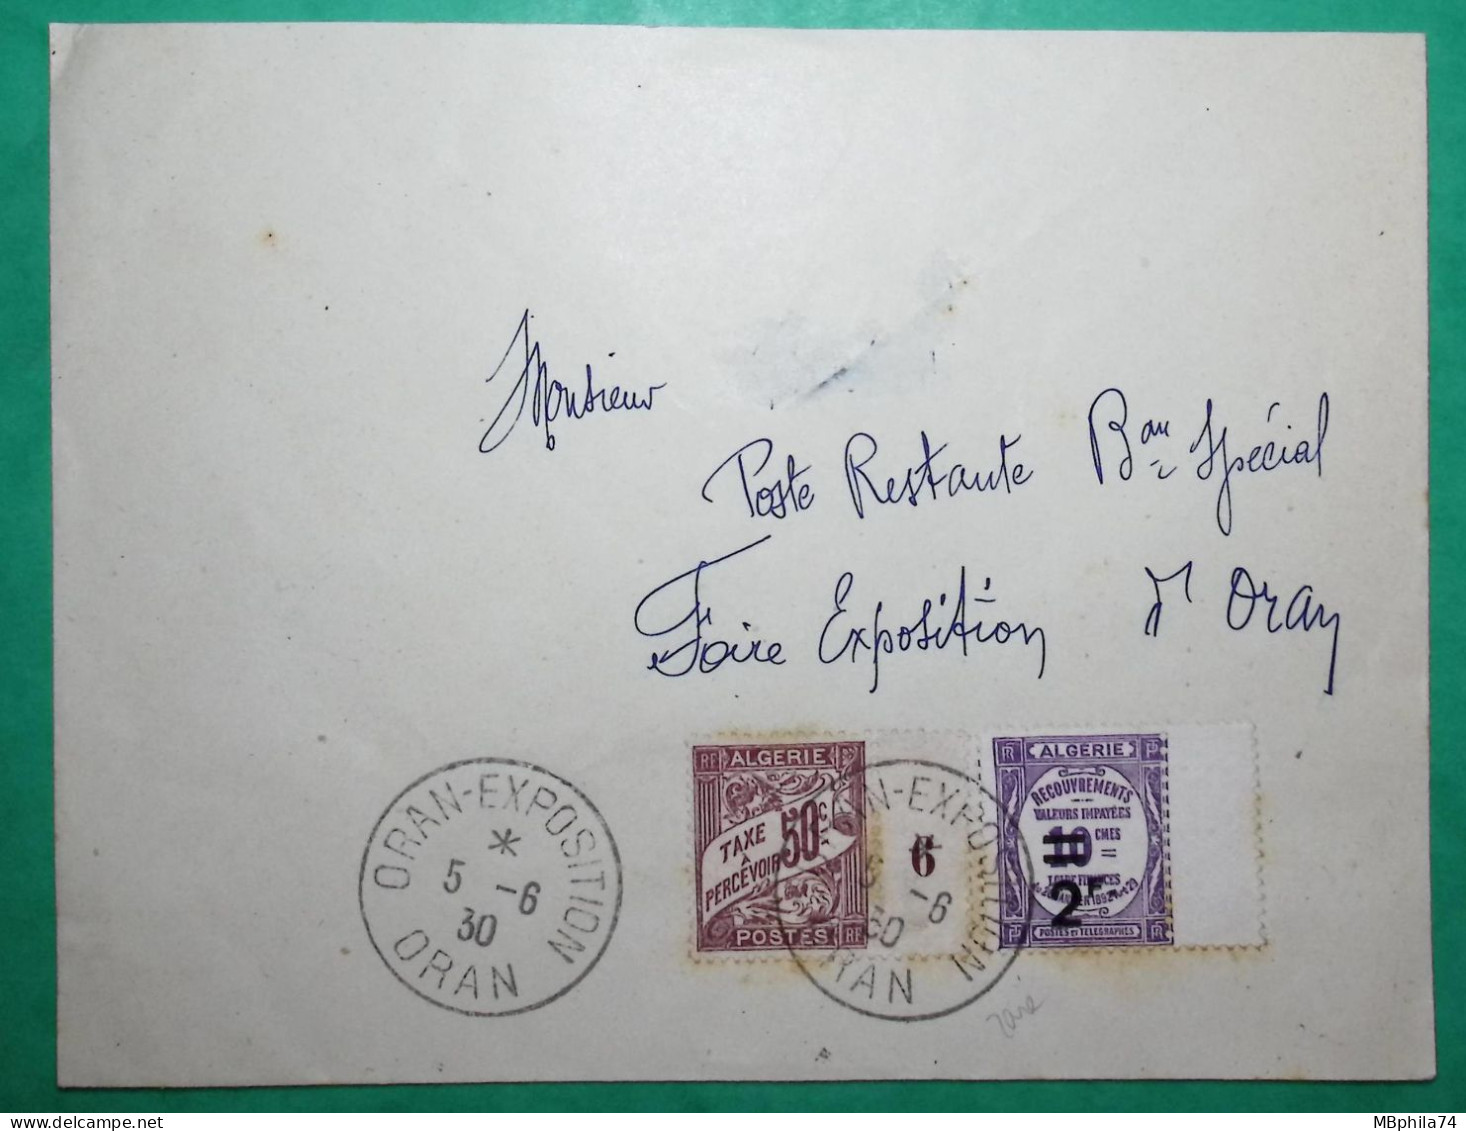 TIMBRES TAXES 50C DUVAL ALGERIE MILLESIME 6 + TAXE RECOUVREMENT SURCHARGE 2F ORAN EXPOSITION 1930 COVER FRANCE - Timbres-taxe